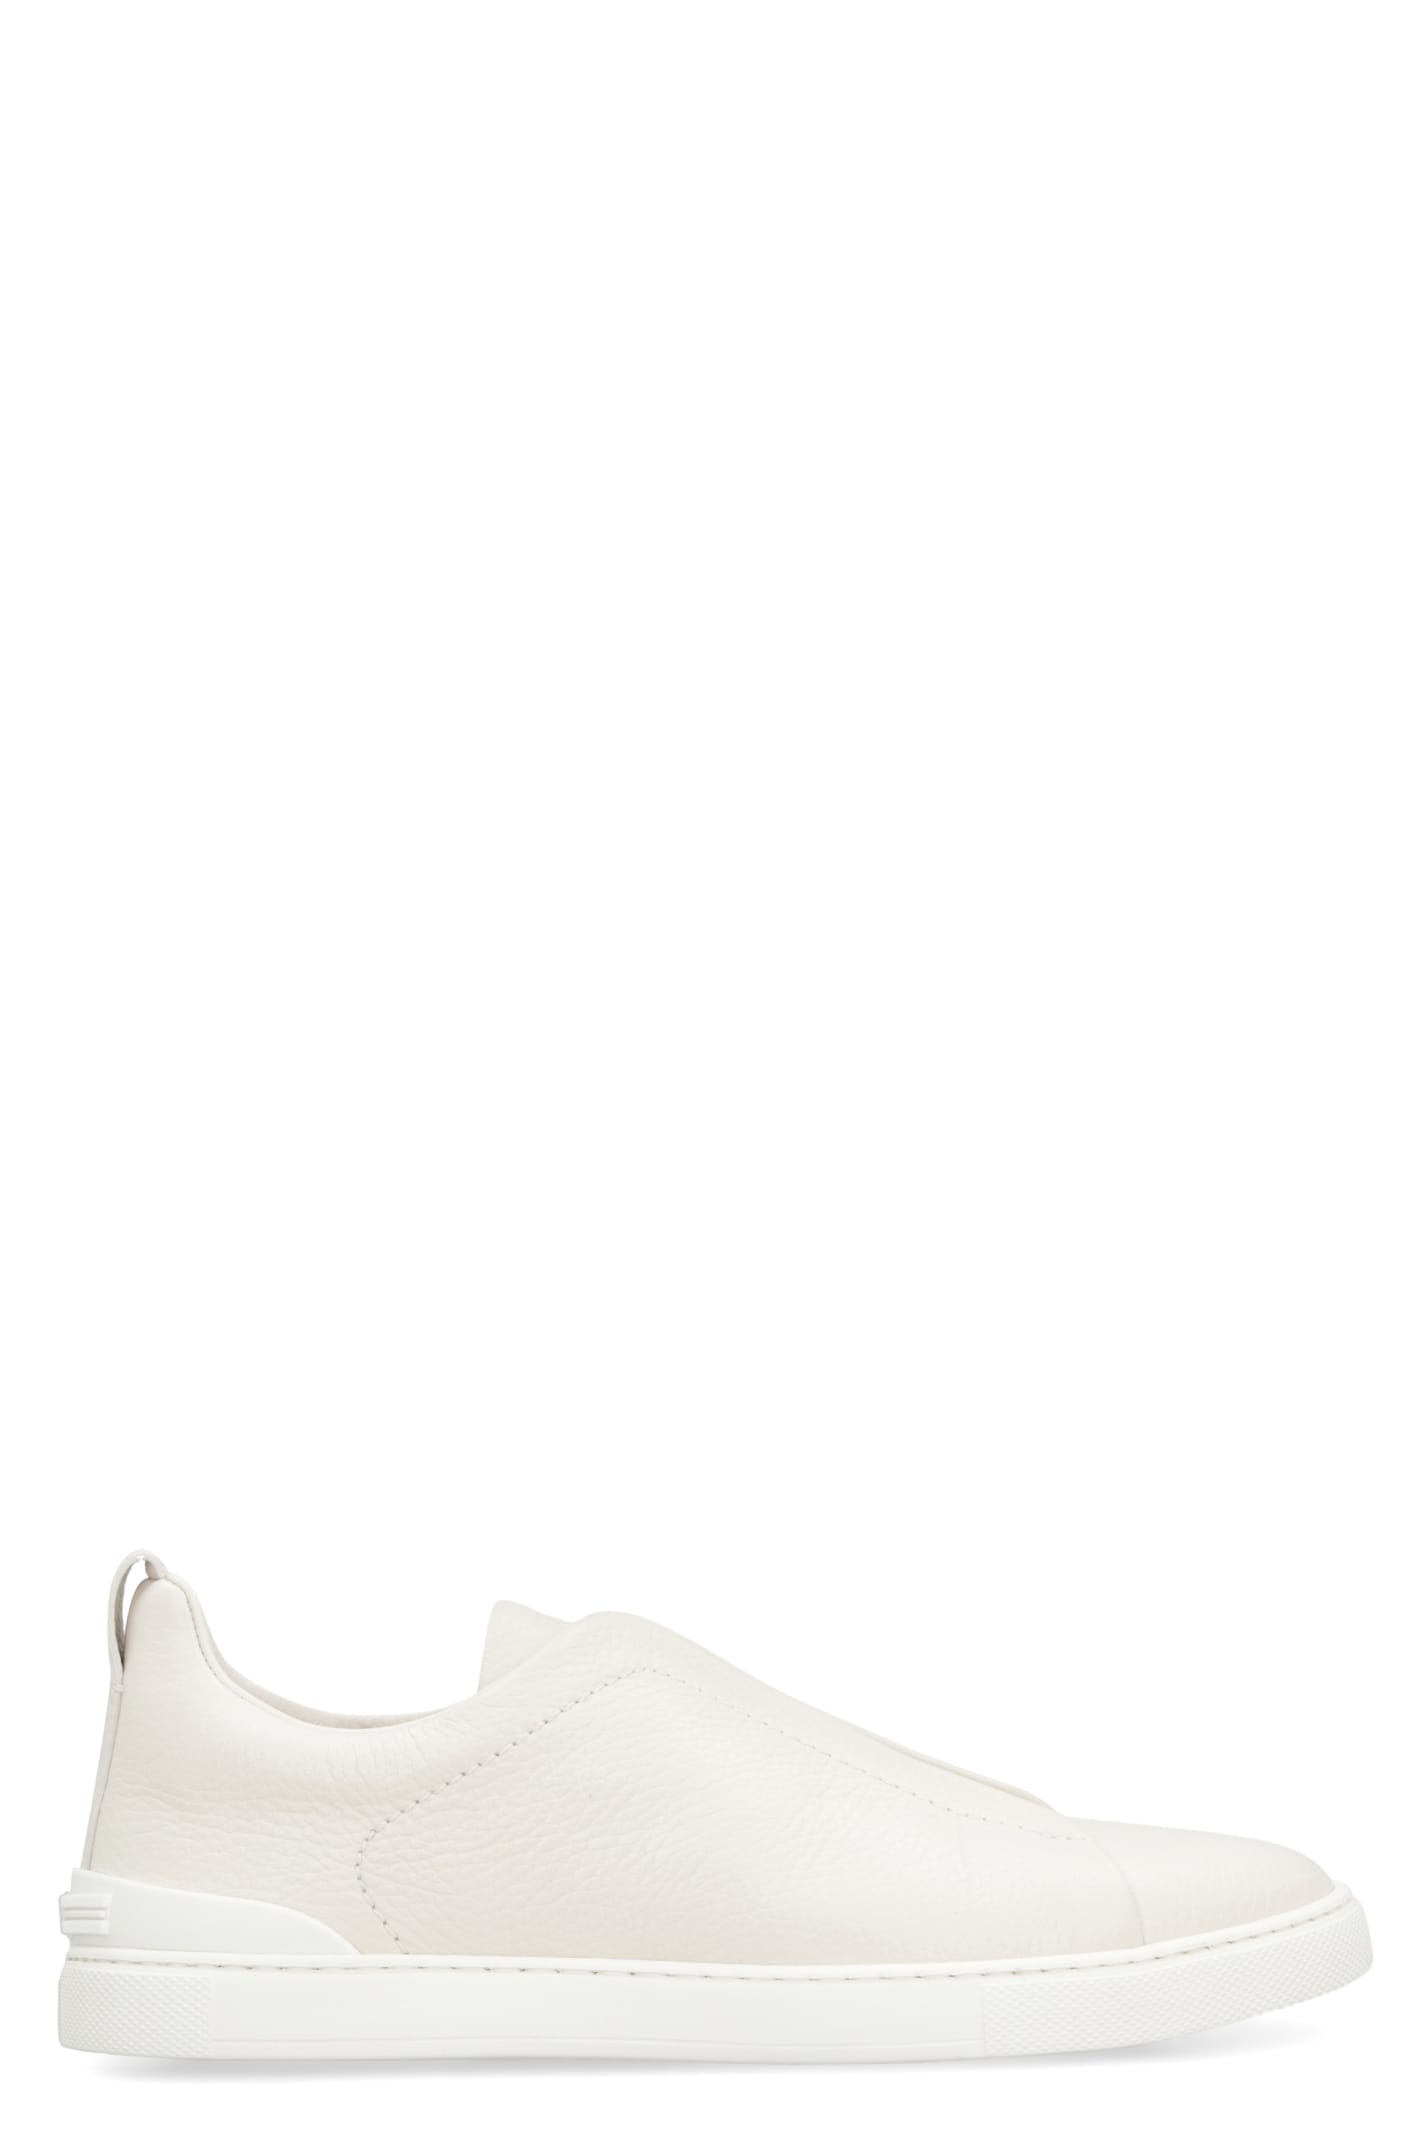 Zegna Triple Stitch Leather Sneakers In Yellow Cream